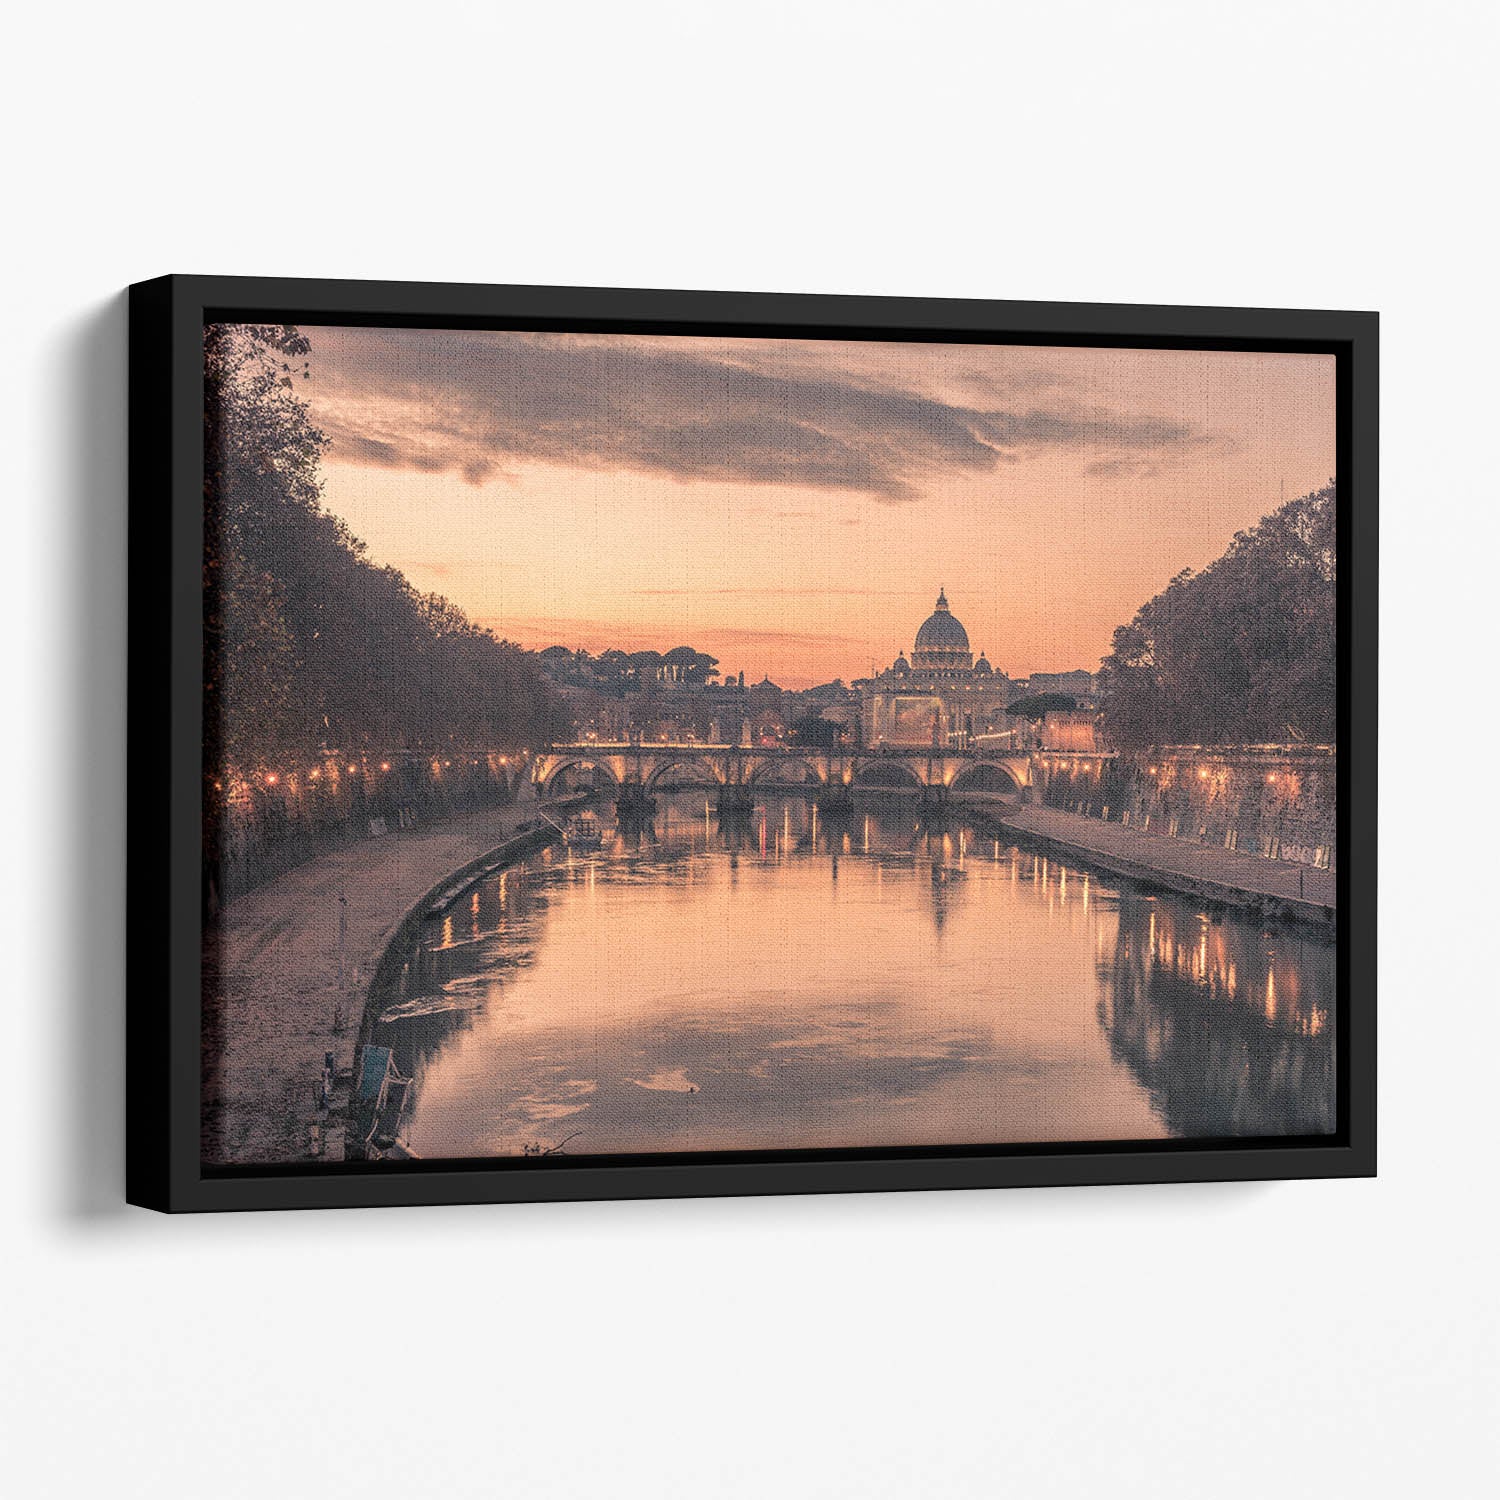 Saint Angelo Bridge and Tiber River in the sunset Floating Framed Canvas